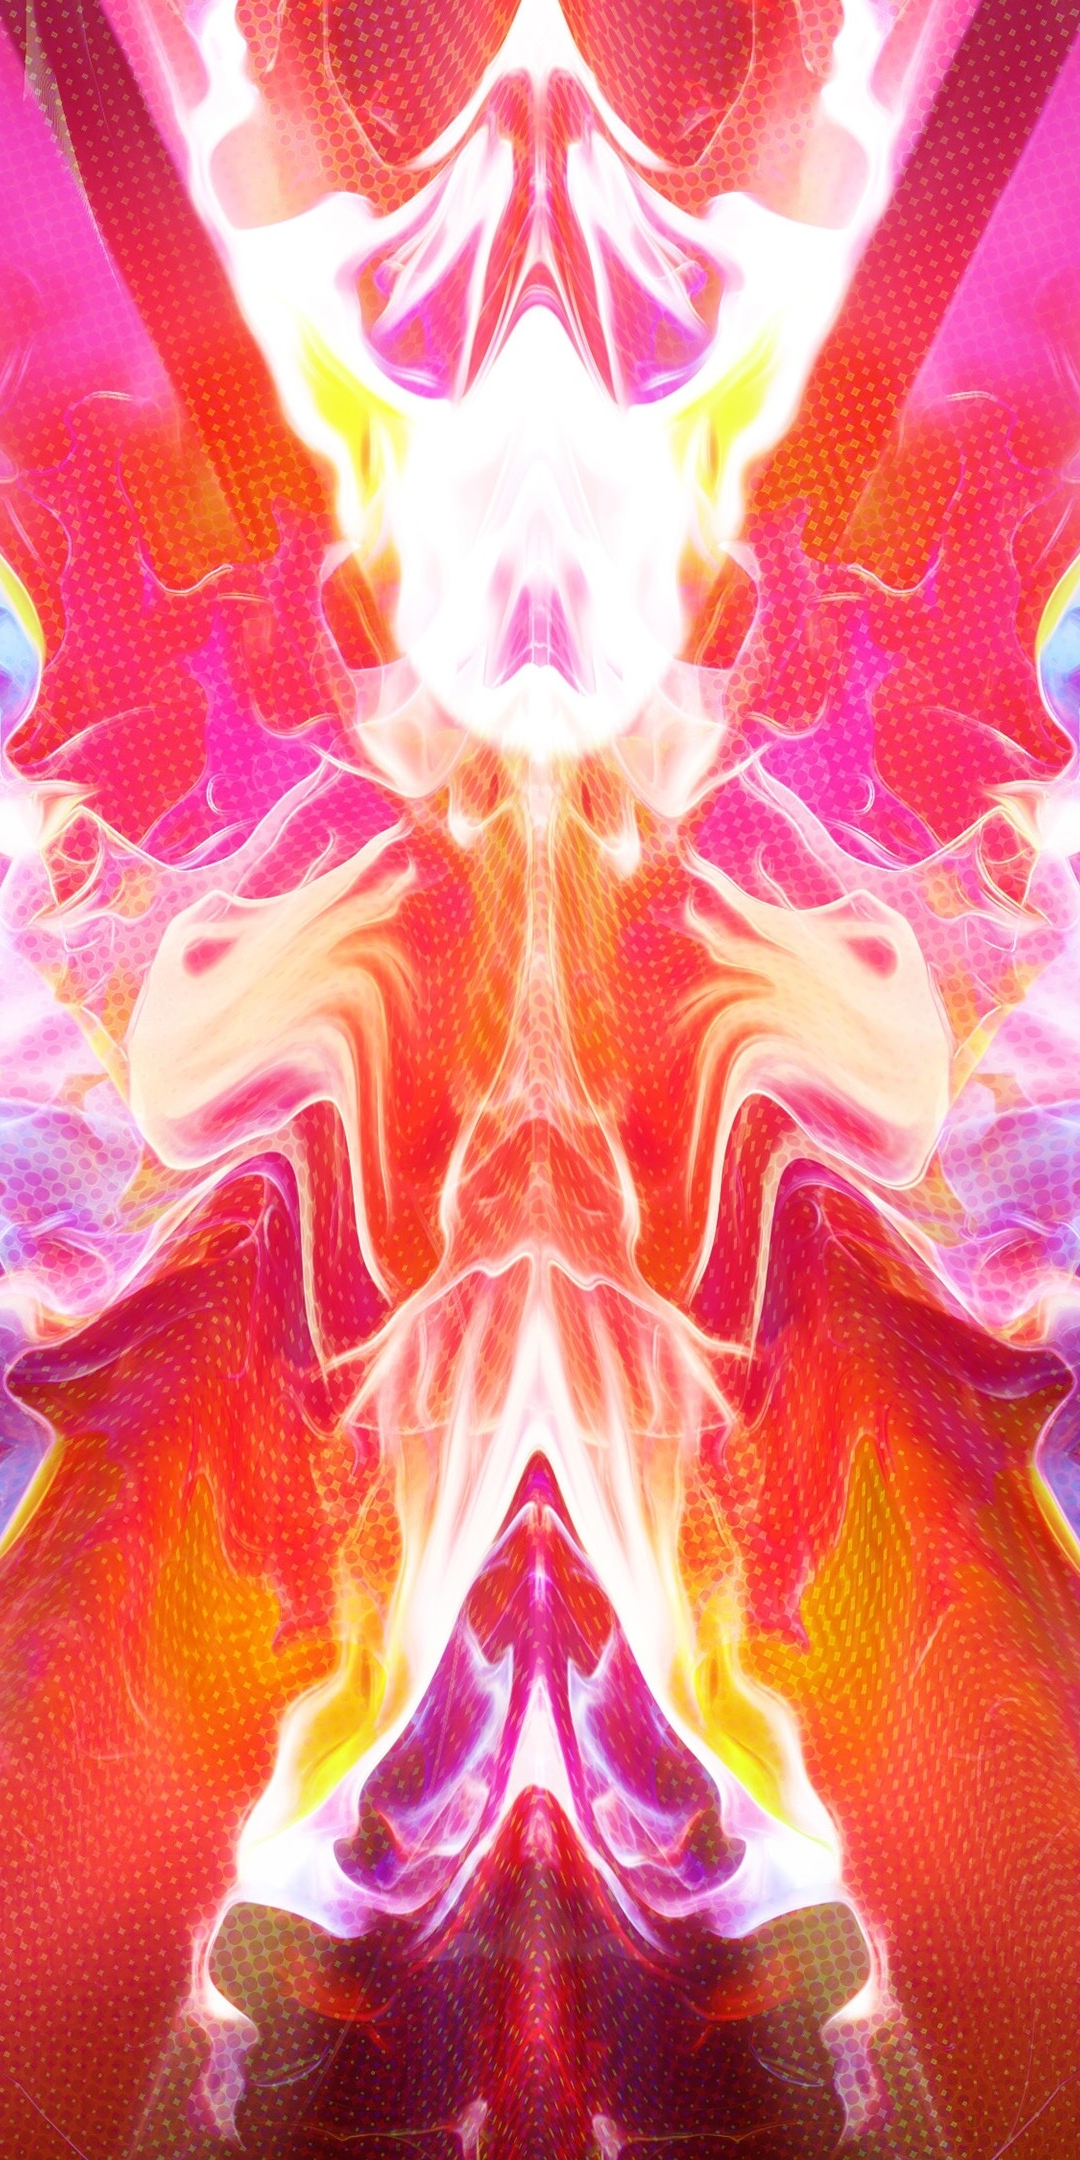 Burning, waves, abstract, flame, 1080x2160 wallpaper